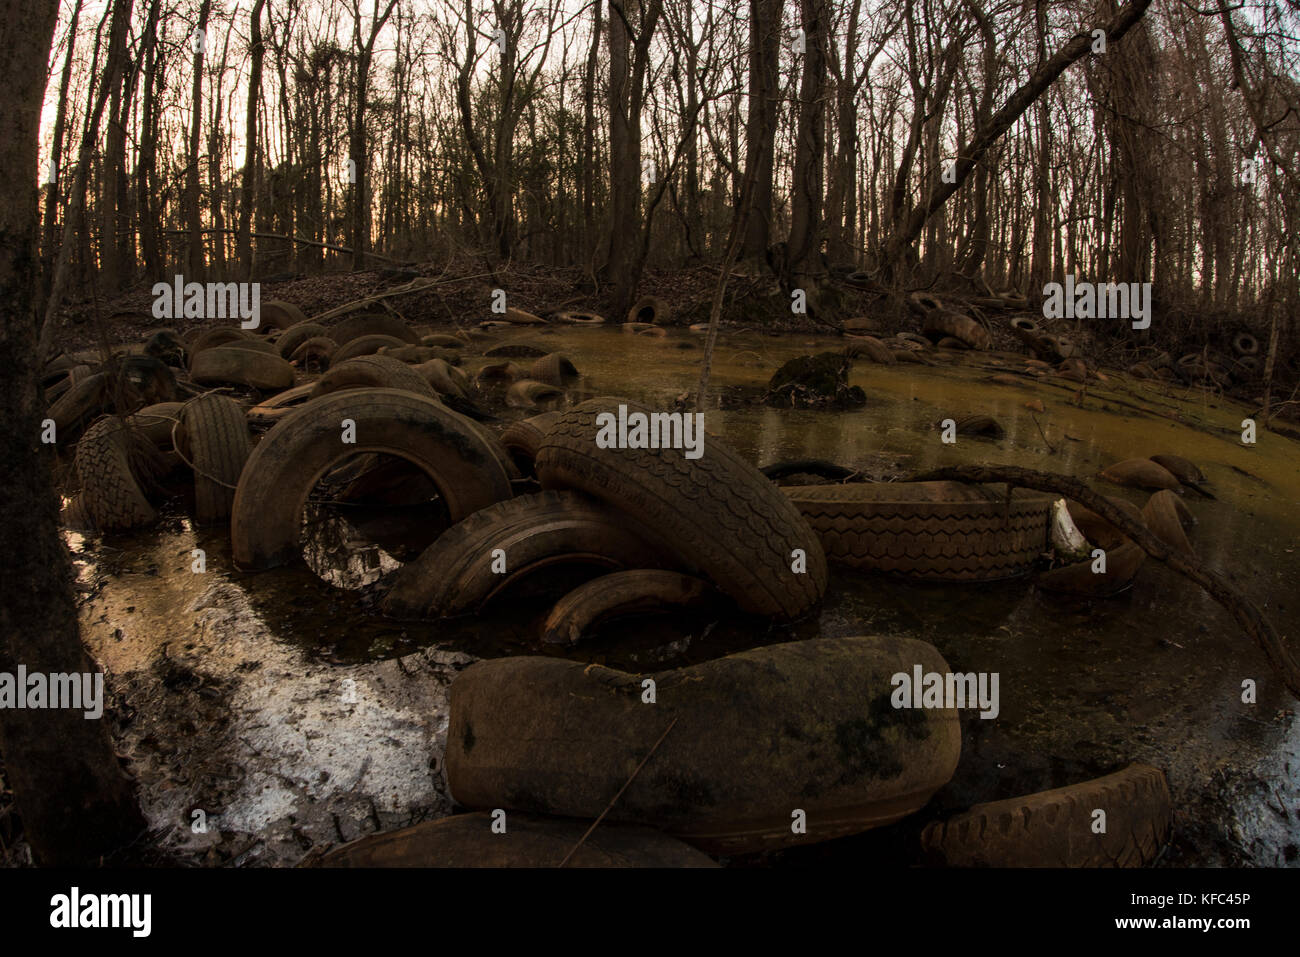 A polluted wetland in North Carolina that has been used as a illegal dumping site for tires. Stock Photo